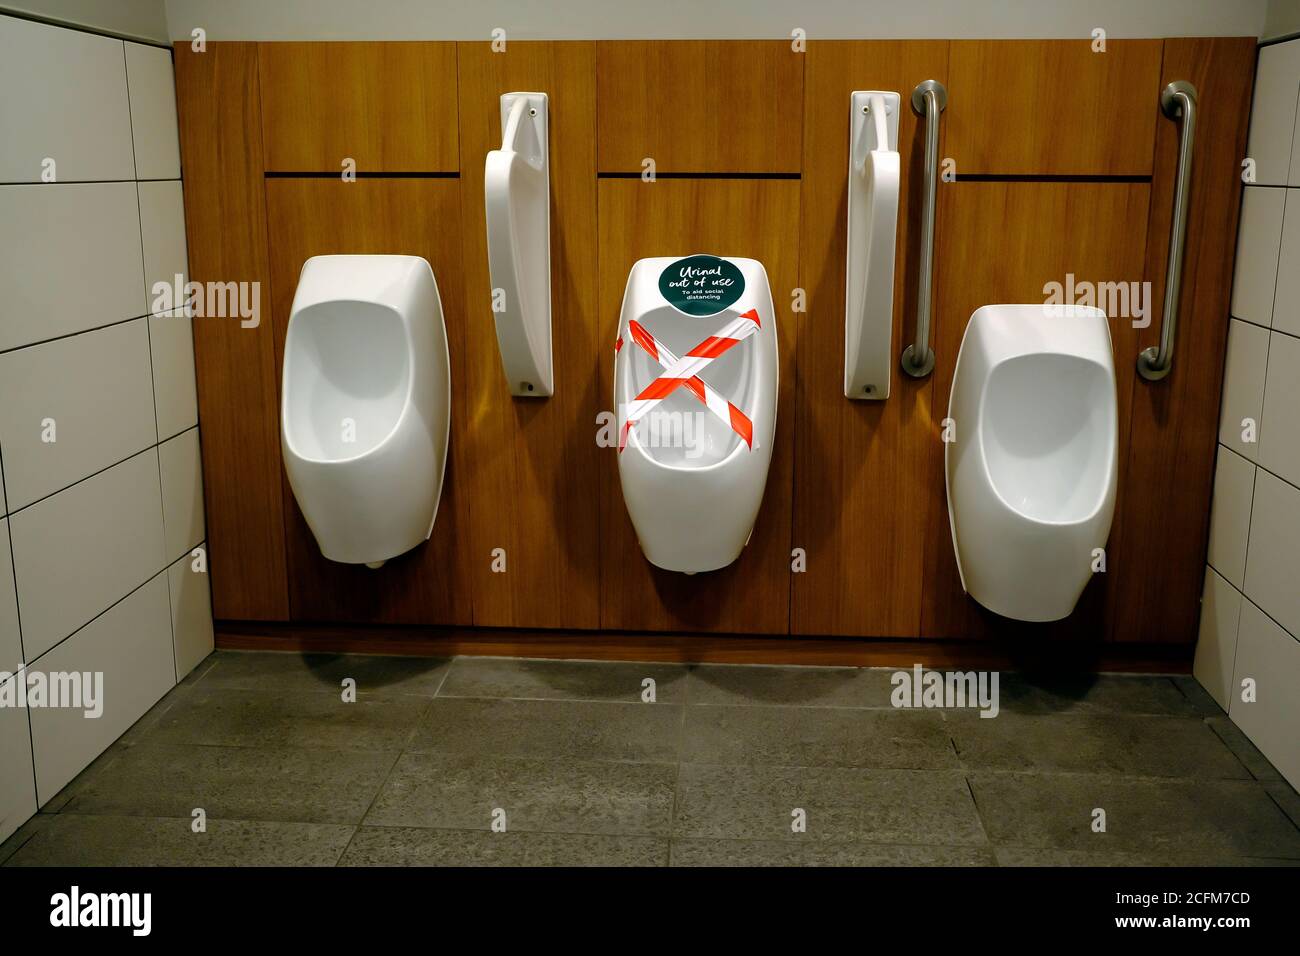 Social distancing measures in a gentelman toilet. One of the urinal is put of use. Stock Photo